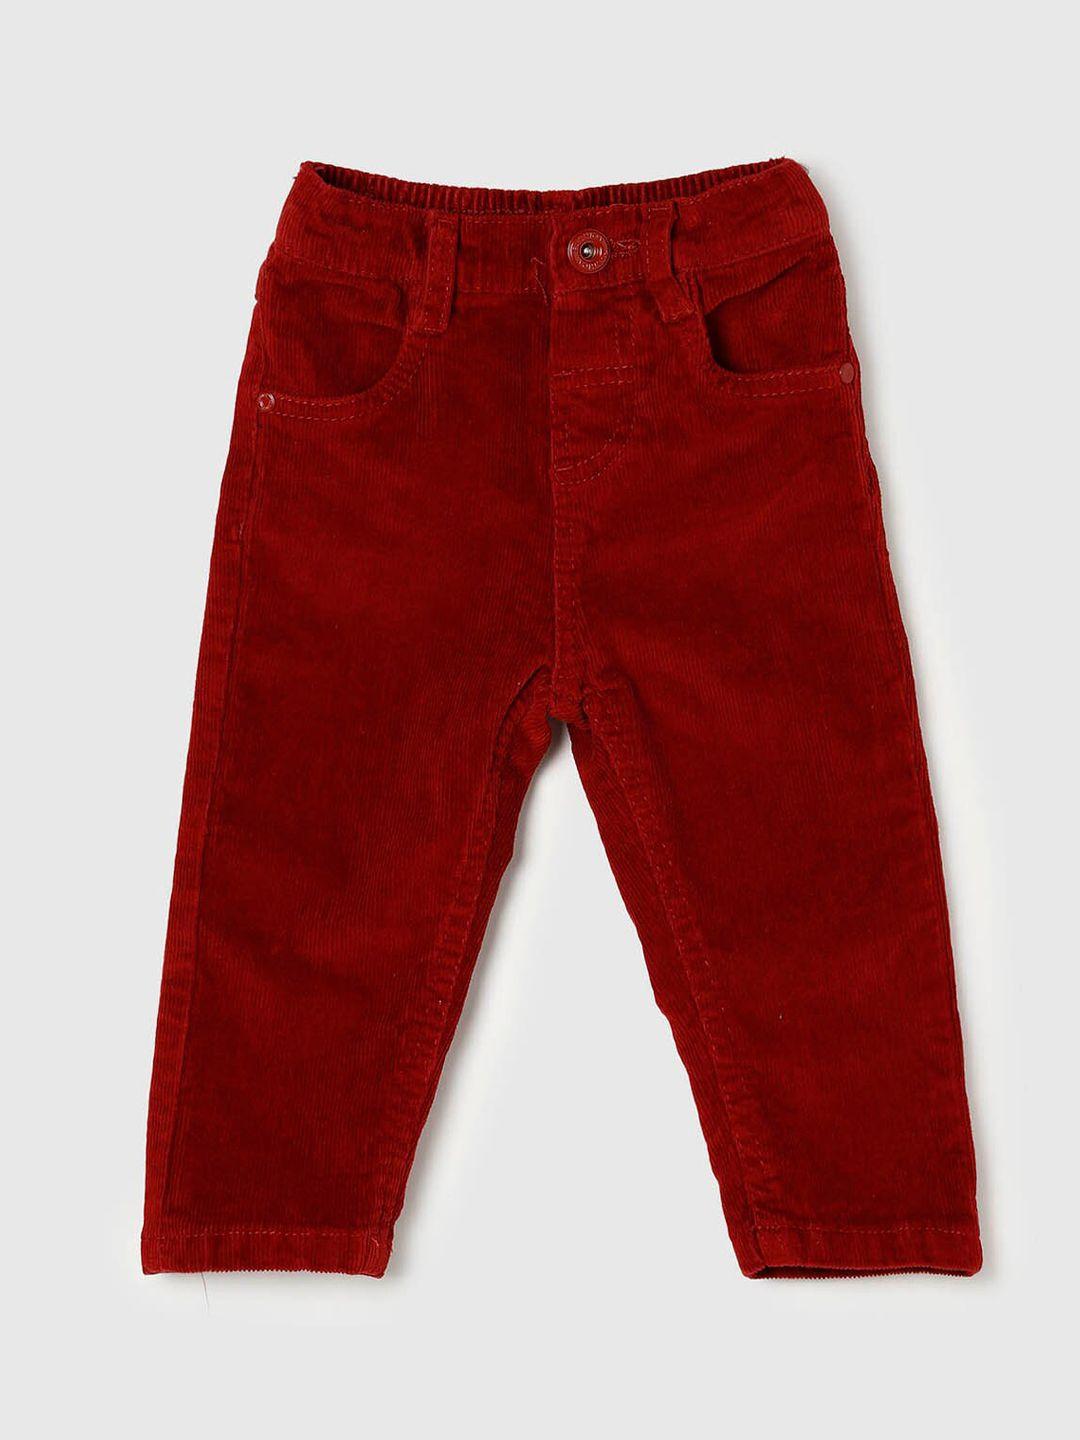 max Boys Red Solid Cotton Trousers